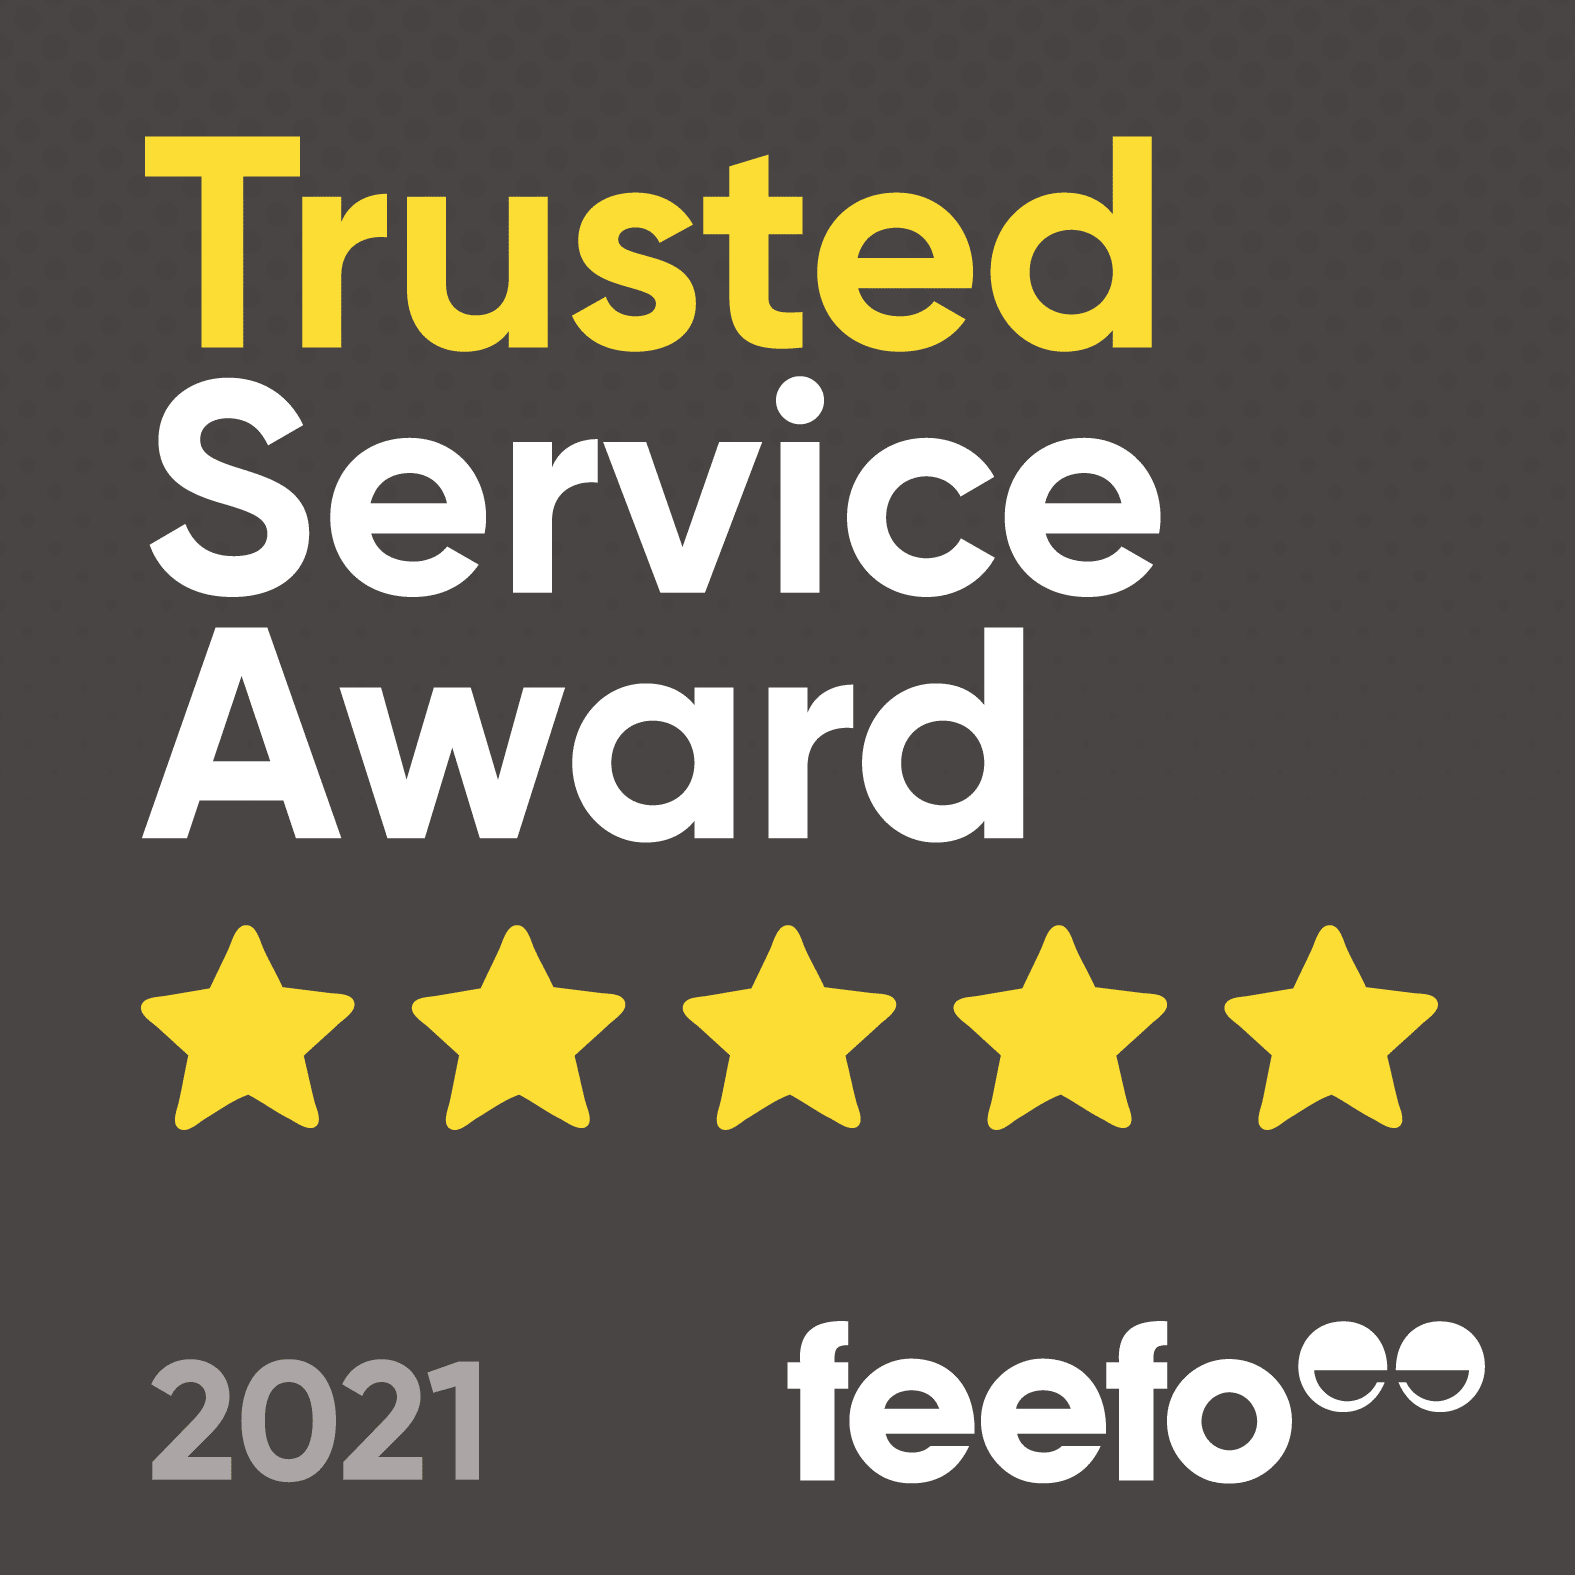 Feefo Trusted Service Award 2021 Win for First Fence!